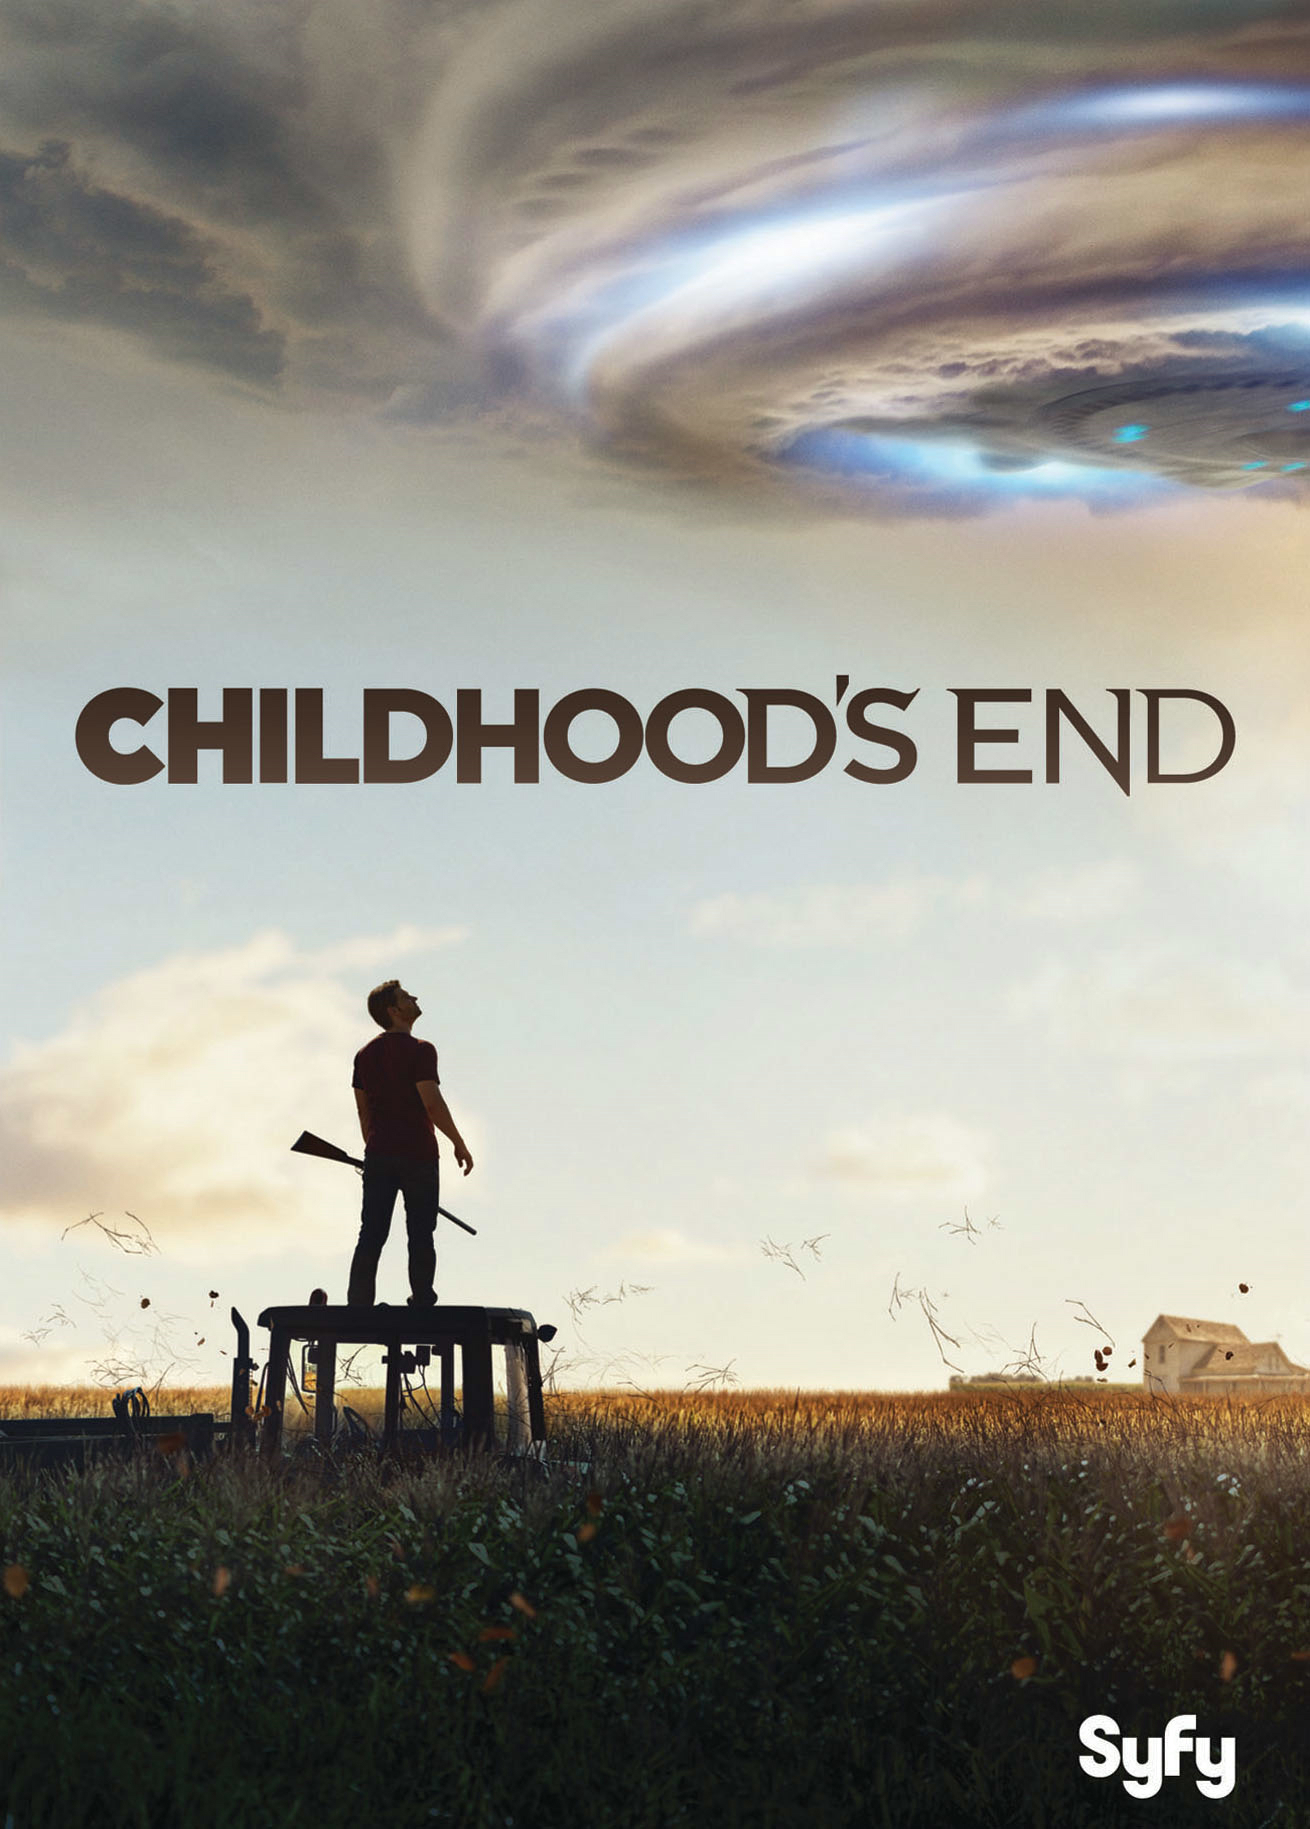 Childhood's End - DVD [ 2015 ]  - Sci Fi Television On DVD - TV Shows On GRUV